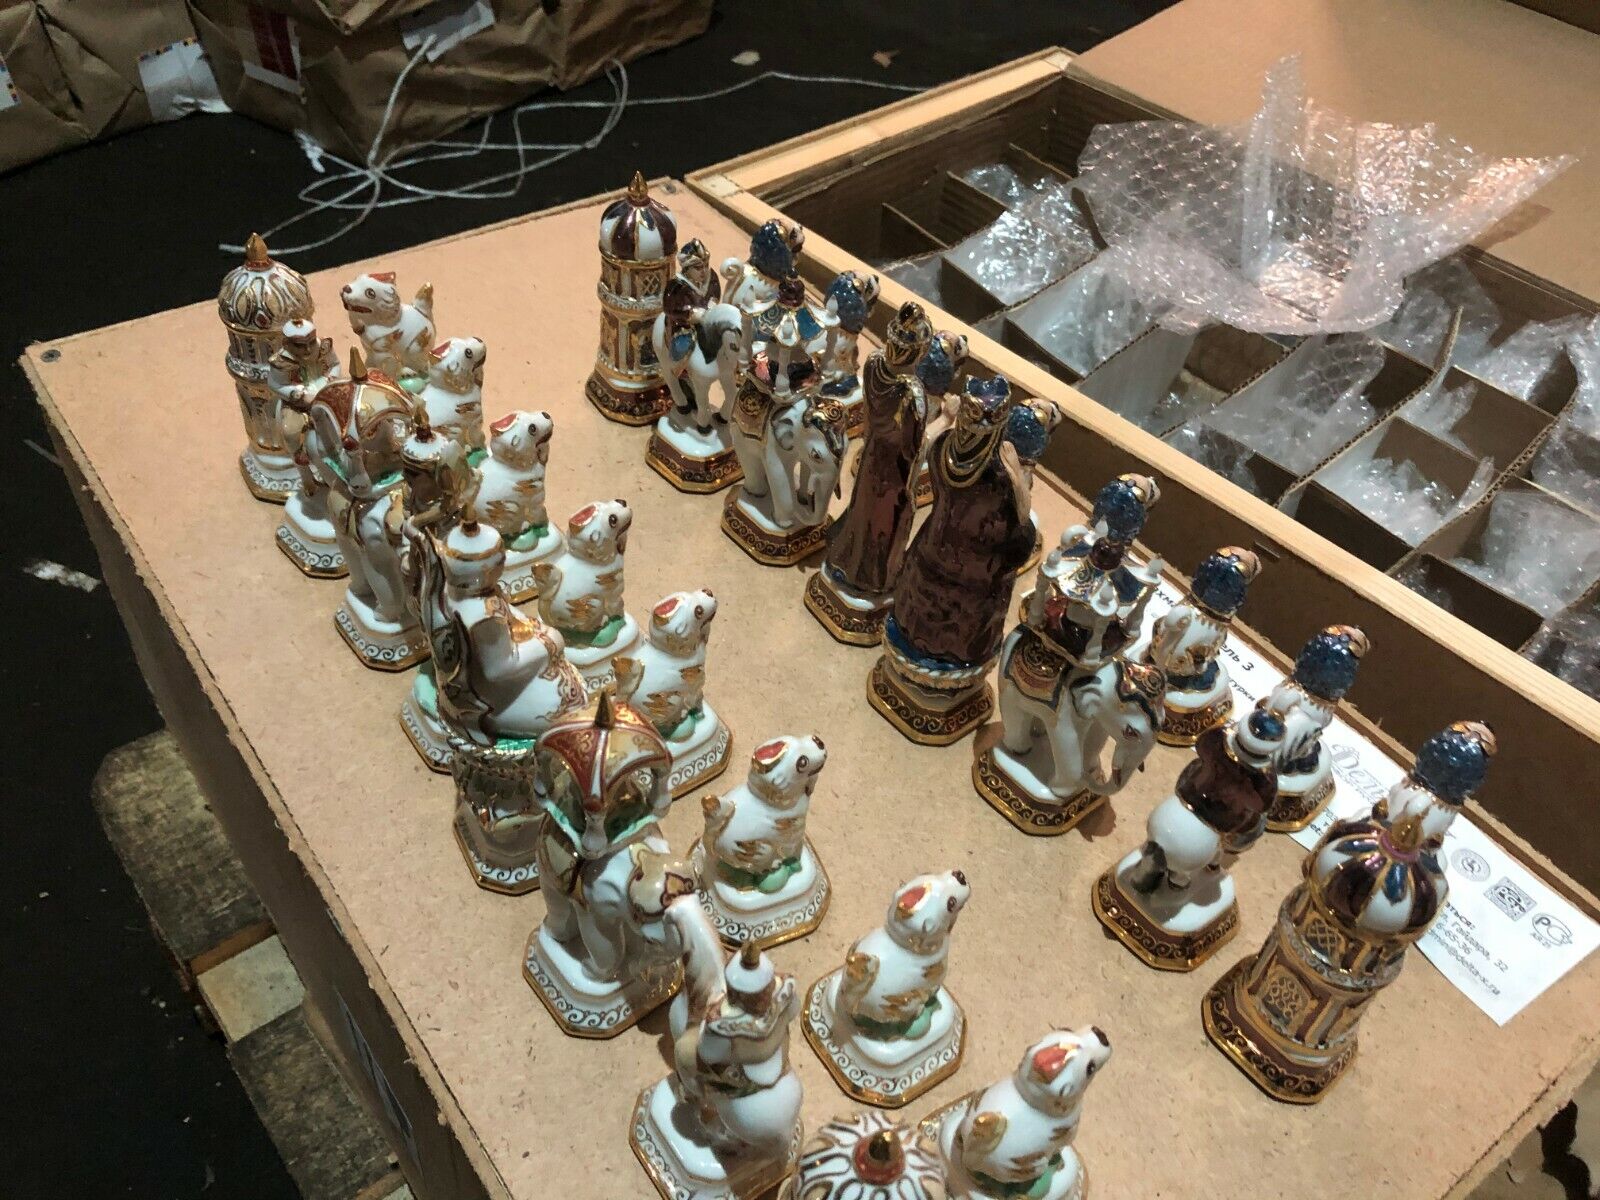 11596.Russian Porcelain Chess Pieces. Mohammedan India Classic. Kislovodsk